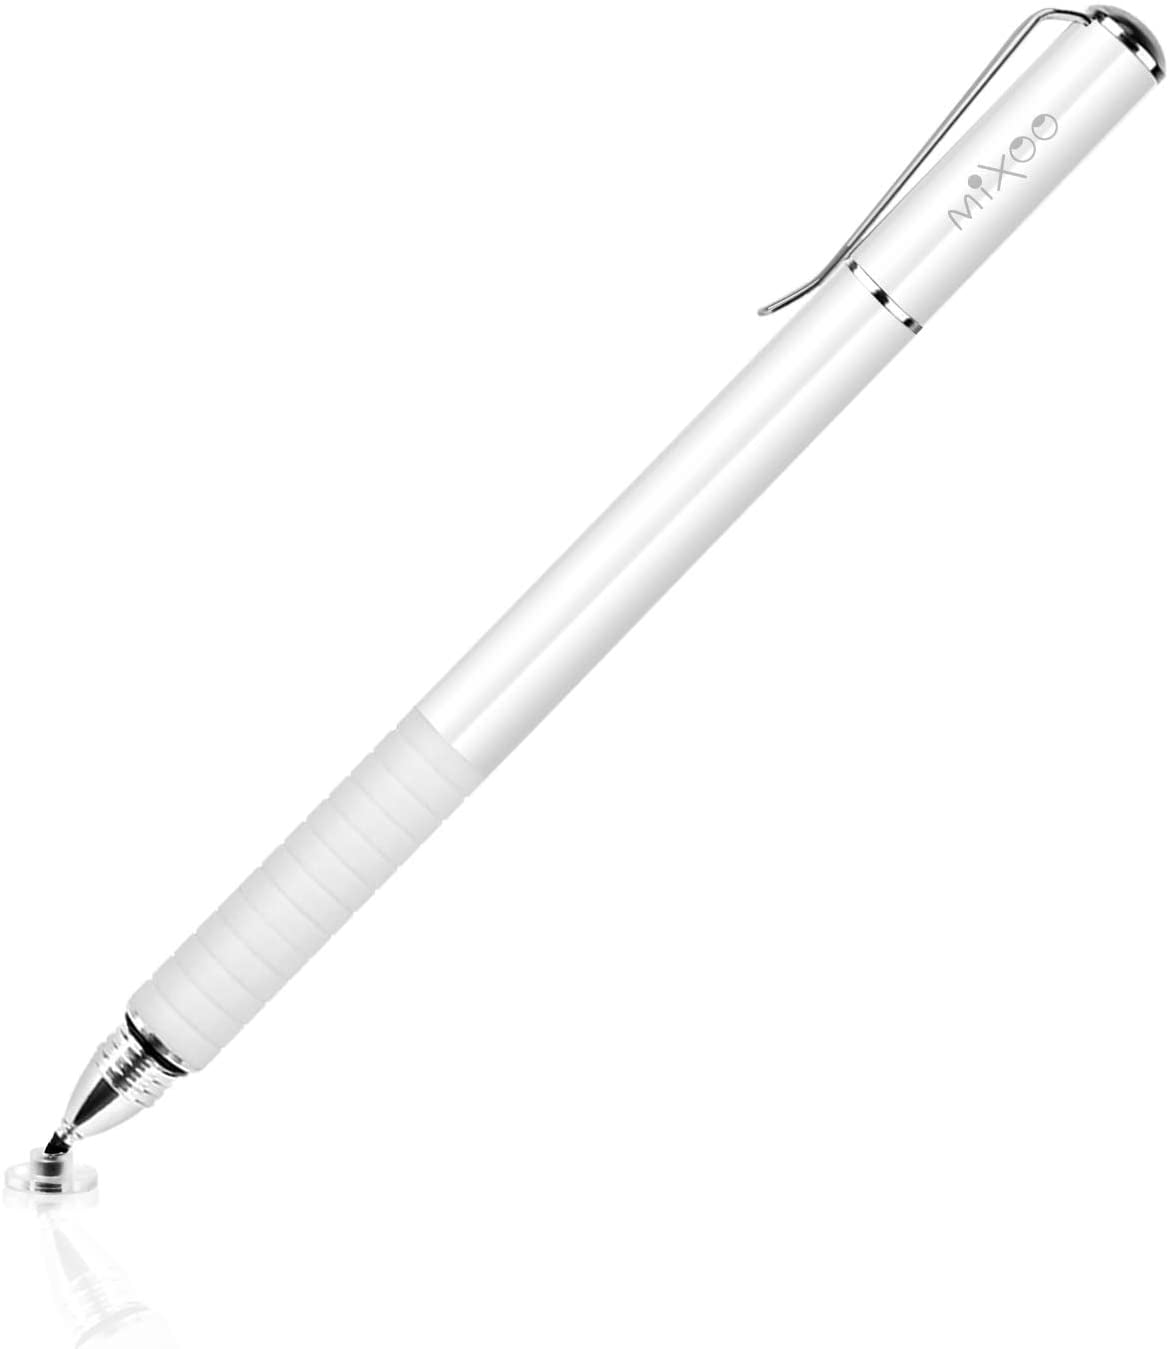 MAXCases  Active Capacitive Stylus/Pen for iPad (White)